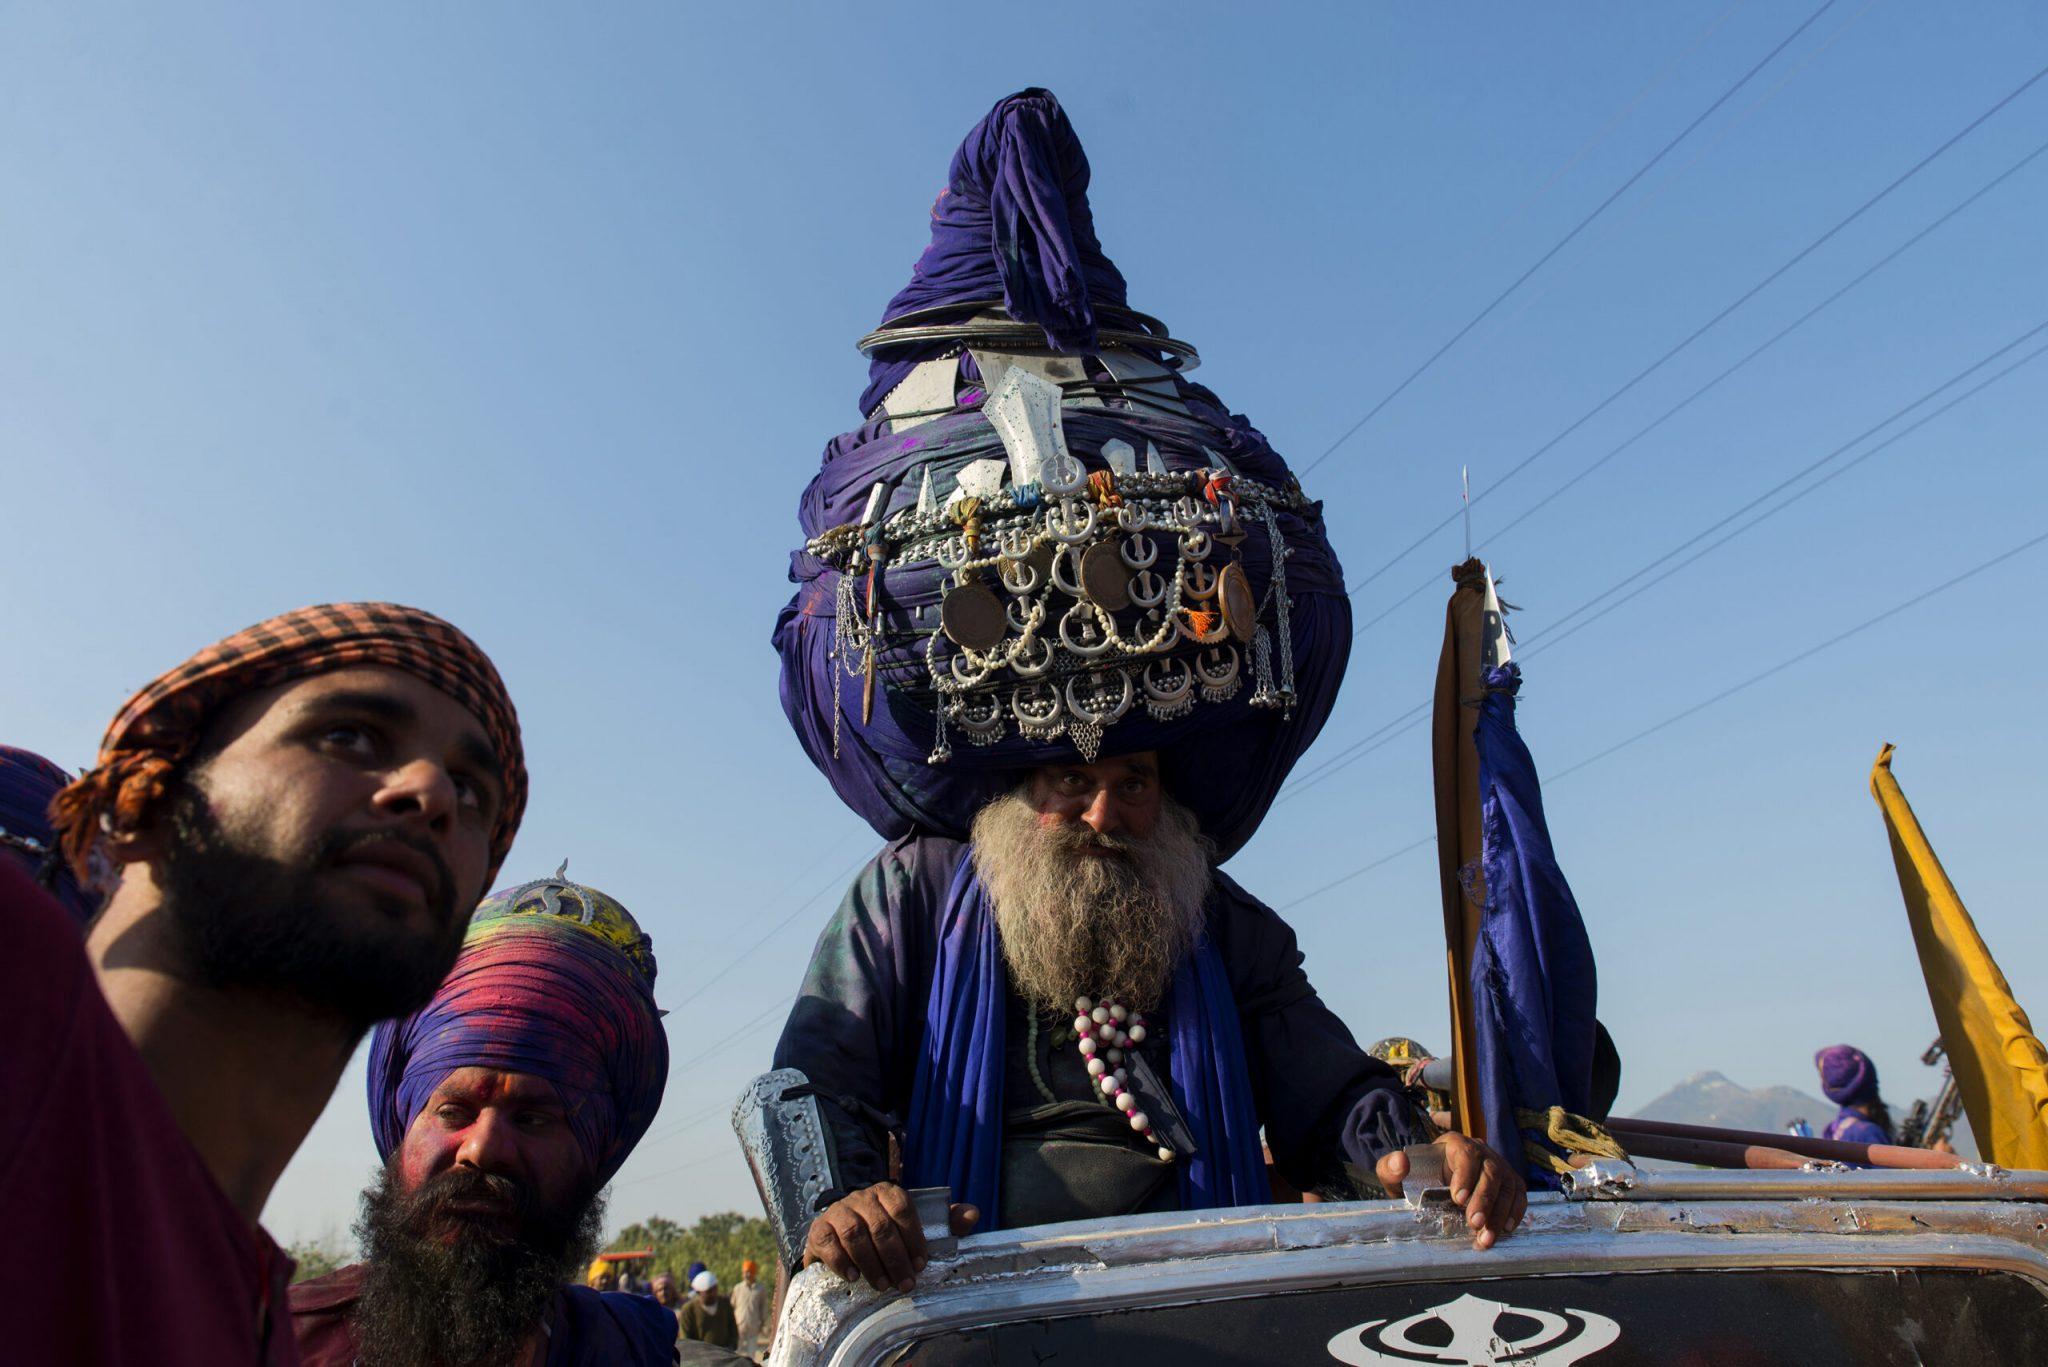 A Nihang Sikh with a huge turban arrives at the ground where martial skills are displayed during Hola Mohalla festival. Photo and story credits by Subhendu Sarkar